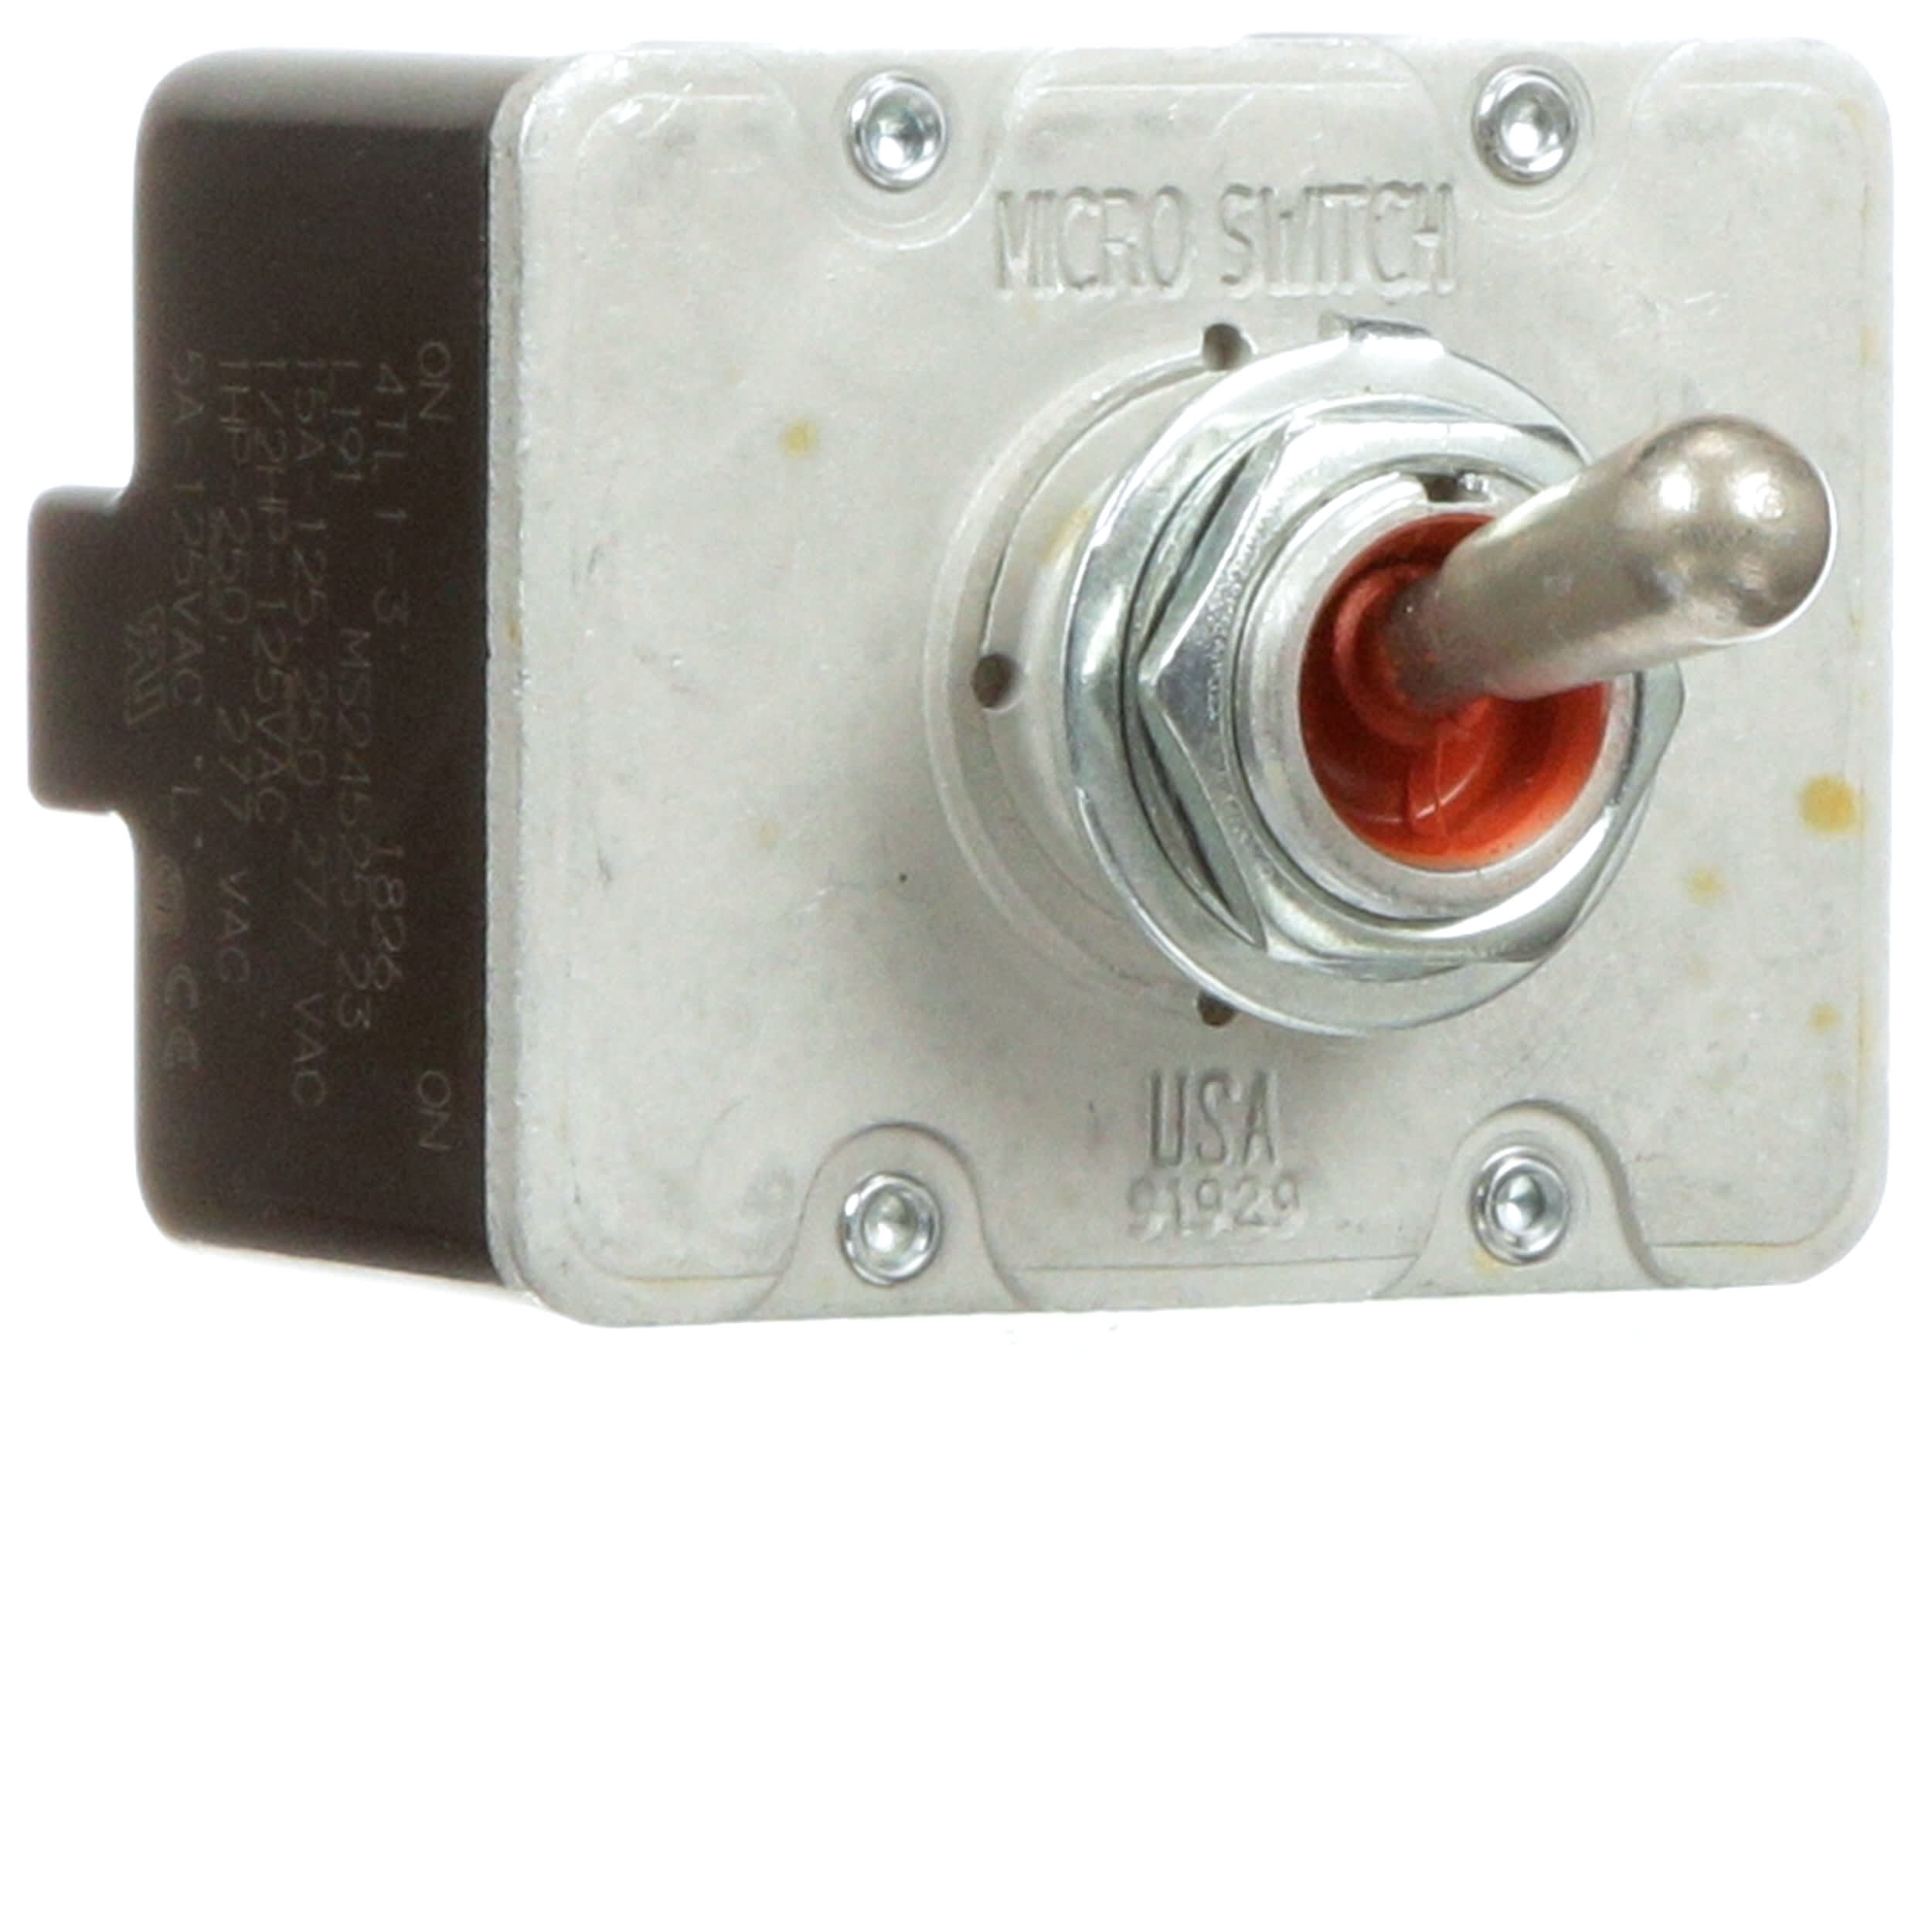 MS24524-23 HONEYWELL MICRO SWITCH DPDT TOGGLE SWITCH NEW IN BAG 2TL1-3 